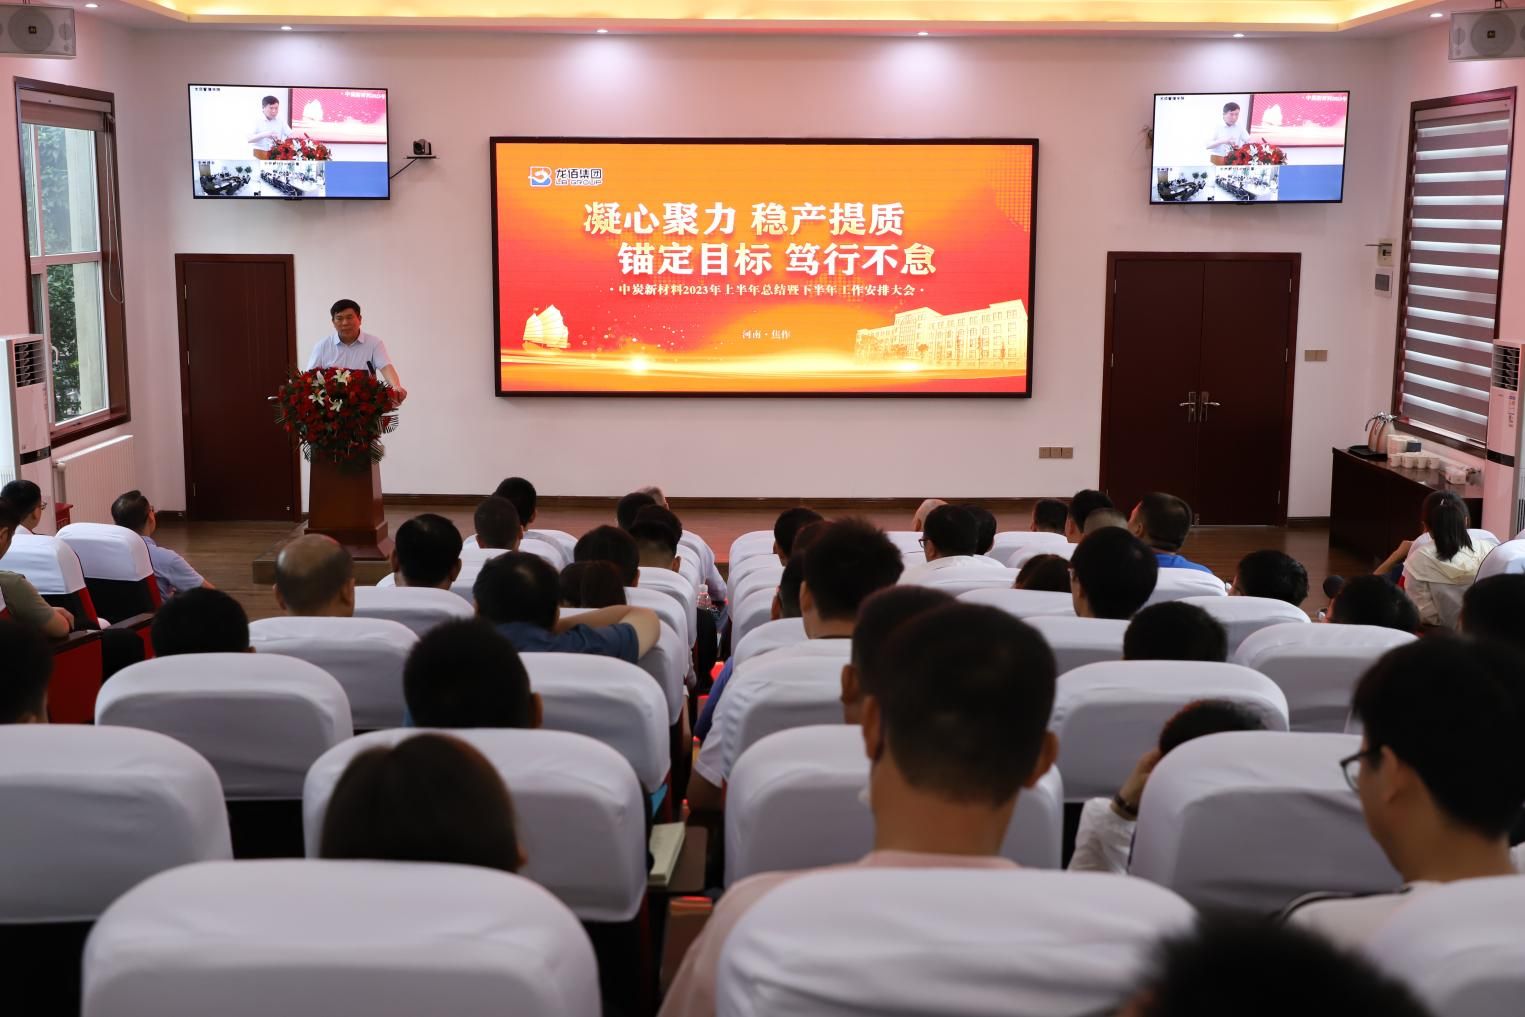 Cohesion, Strength, Stability, Production, Quality, and Anchoring Goals-Summary of China Carbon New Materials in the First Half of 2023 and Work Arrangement Conference in the Second Half of 2023